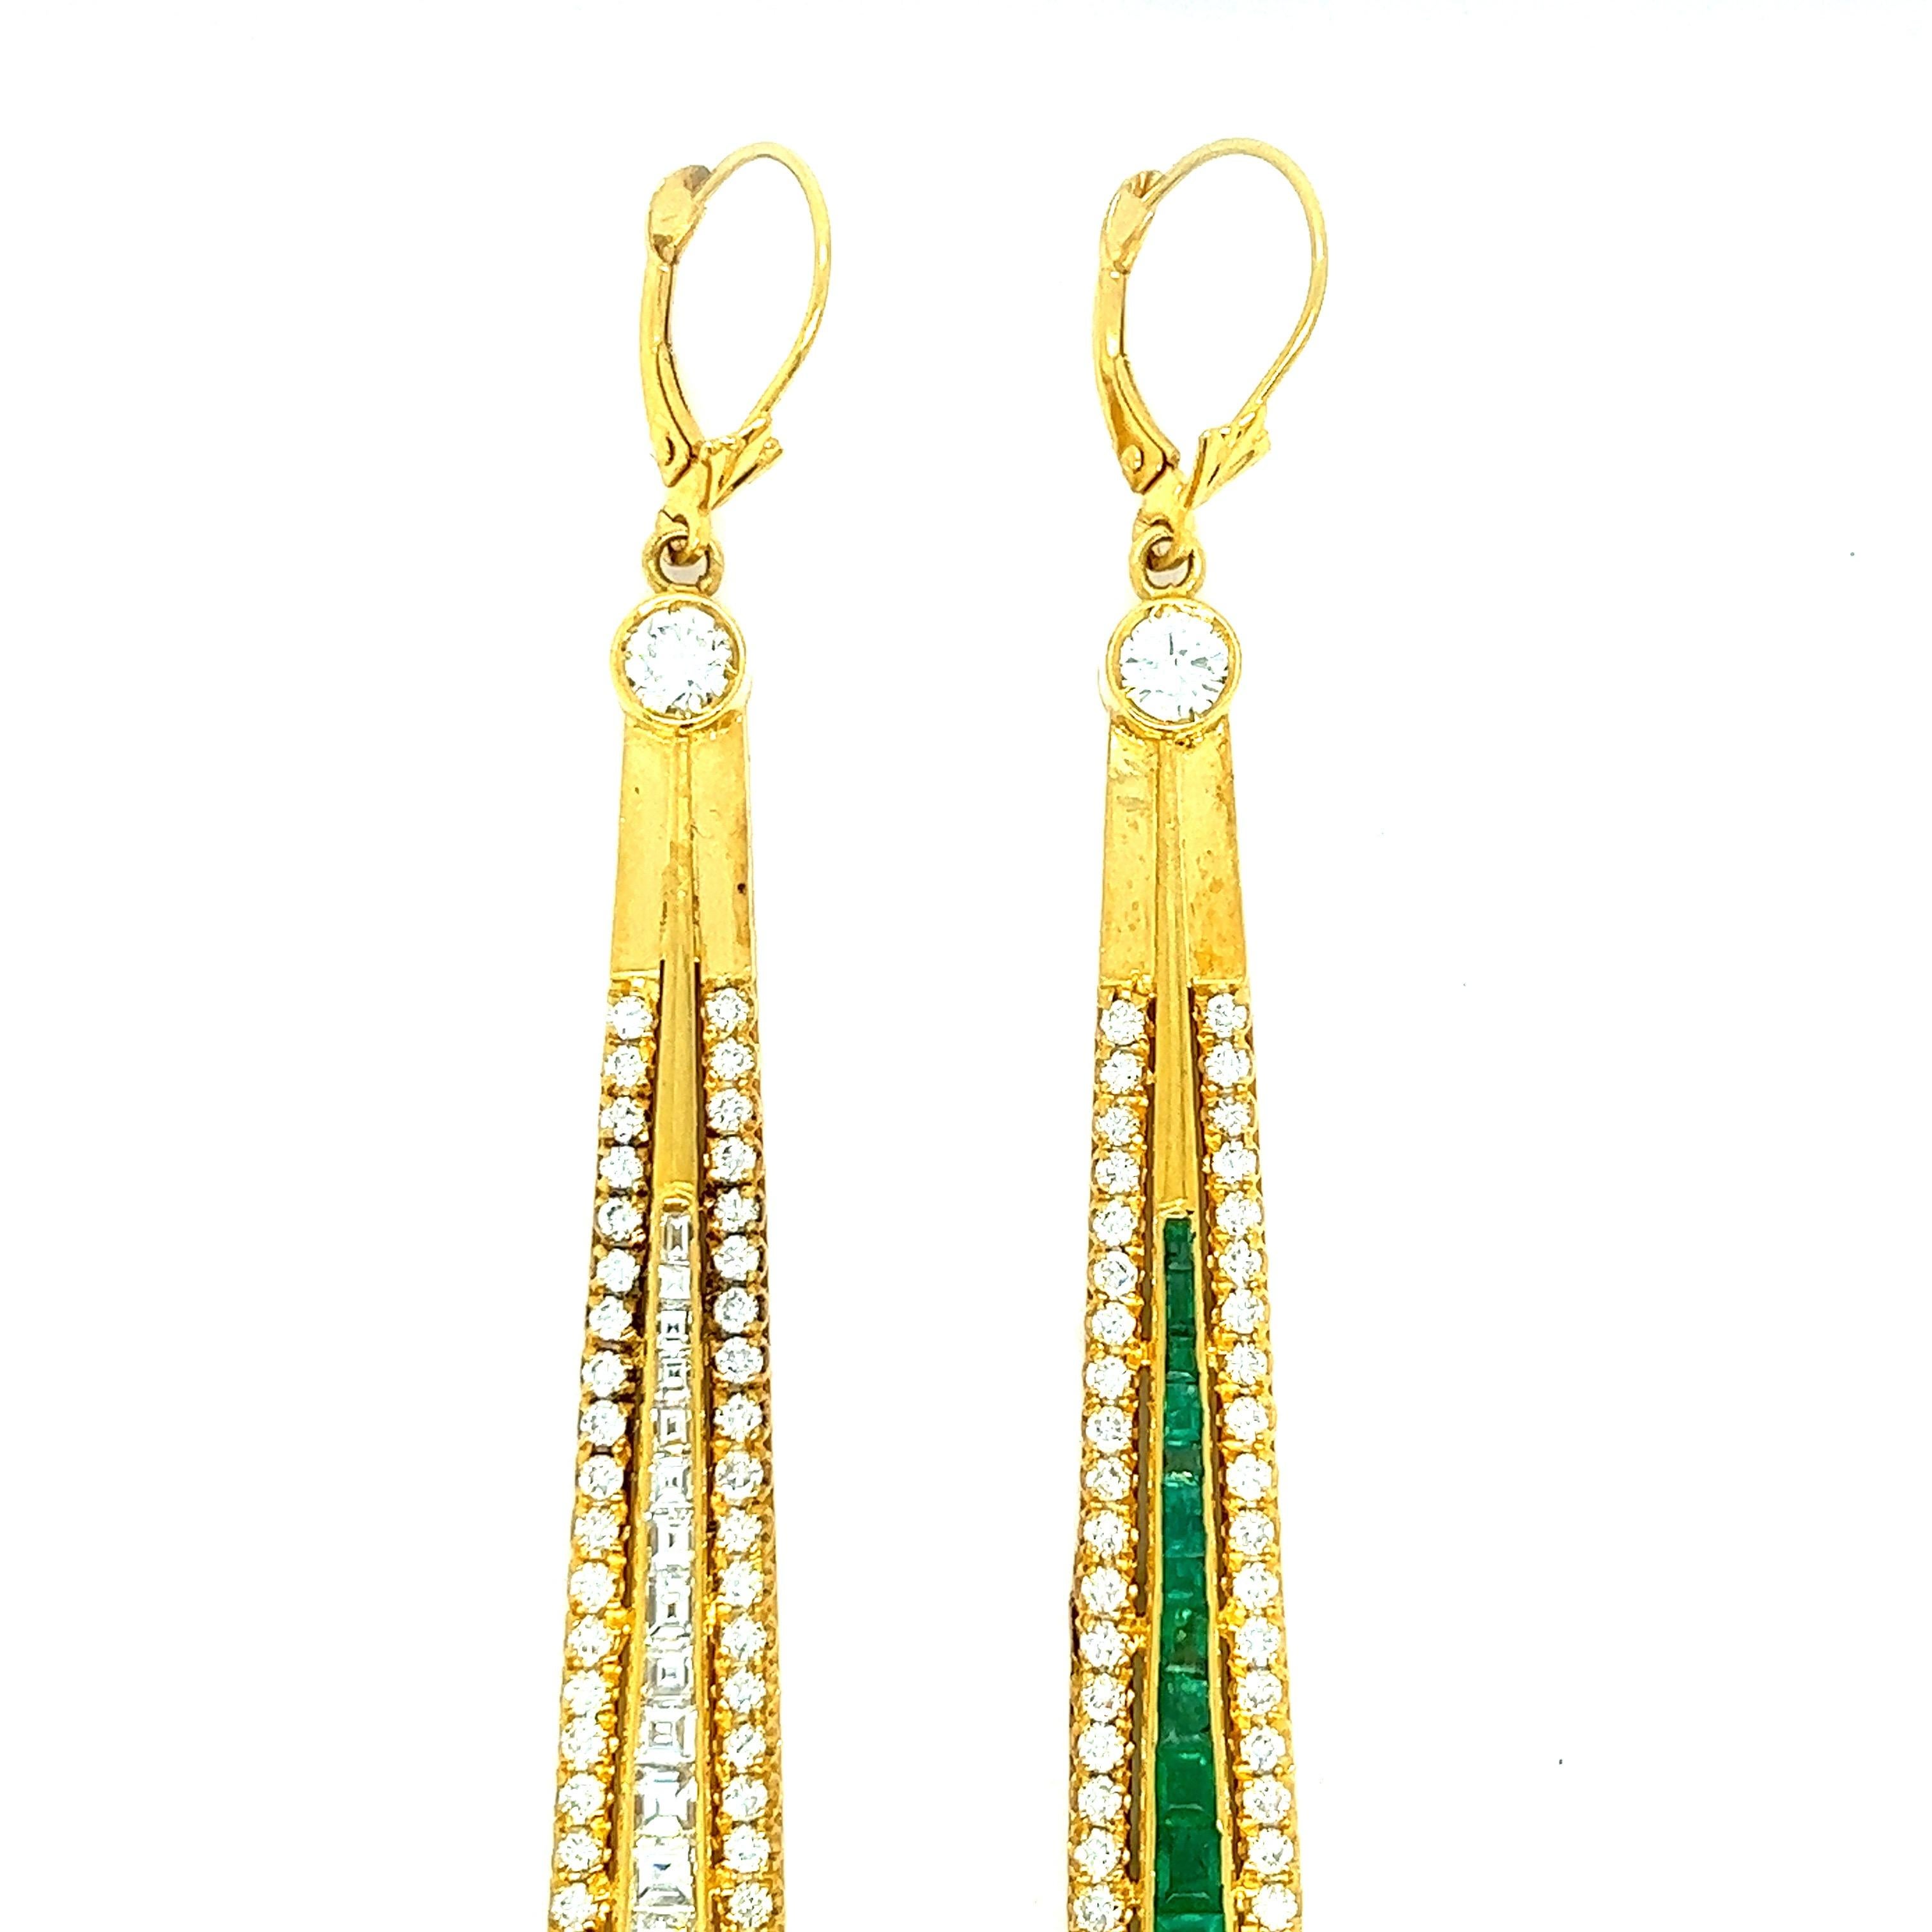 Diamond emerald long drop earrings, made in Italy

Square- and round-cut diamonds of 4 carats, square-cut emeralds of 1 carat, 14 karat yellow gold; marked 14k

Size: width 0.31 inch, length 3 inches
Total weight: 16.9 grams